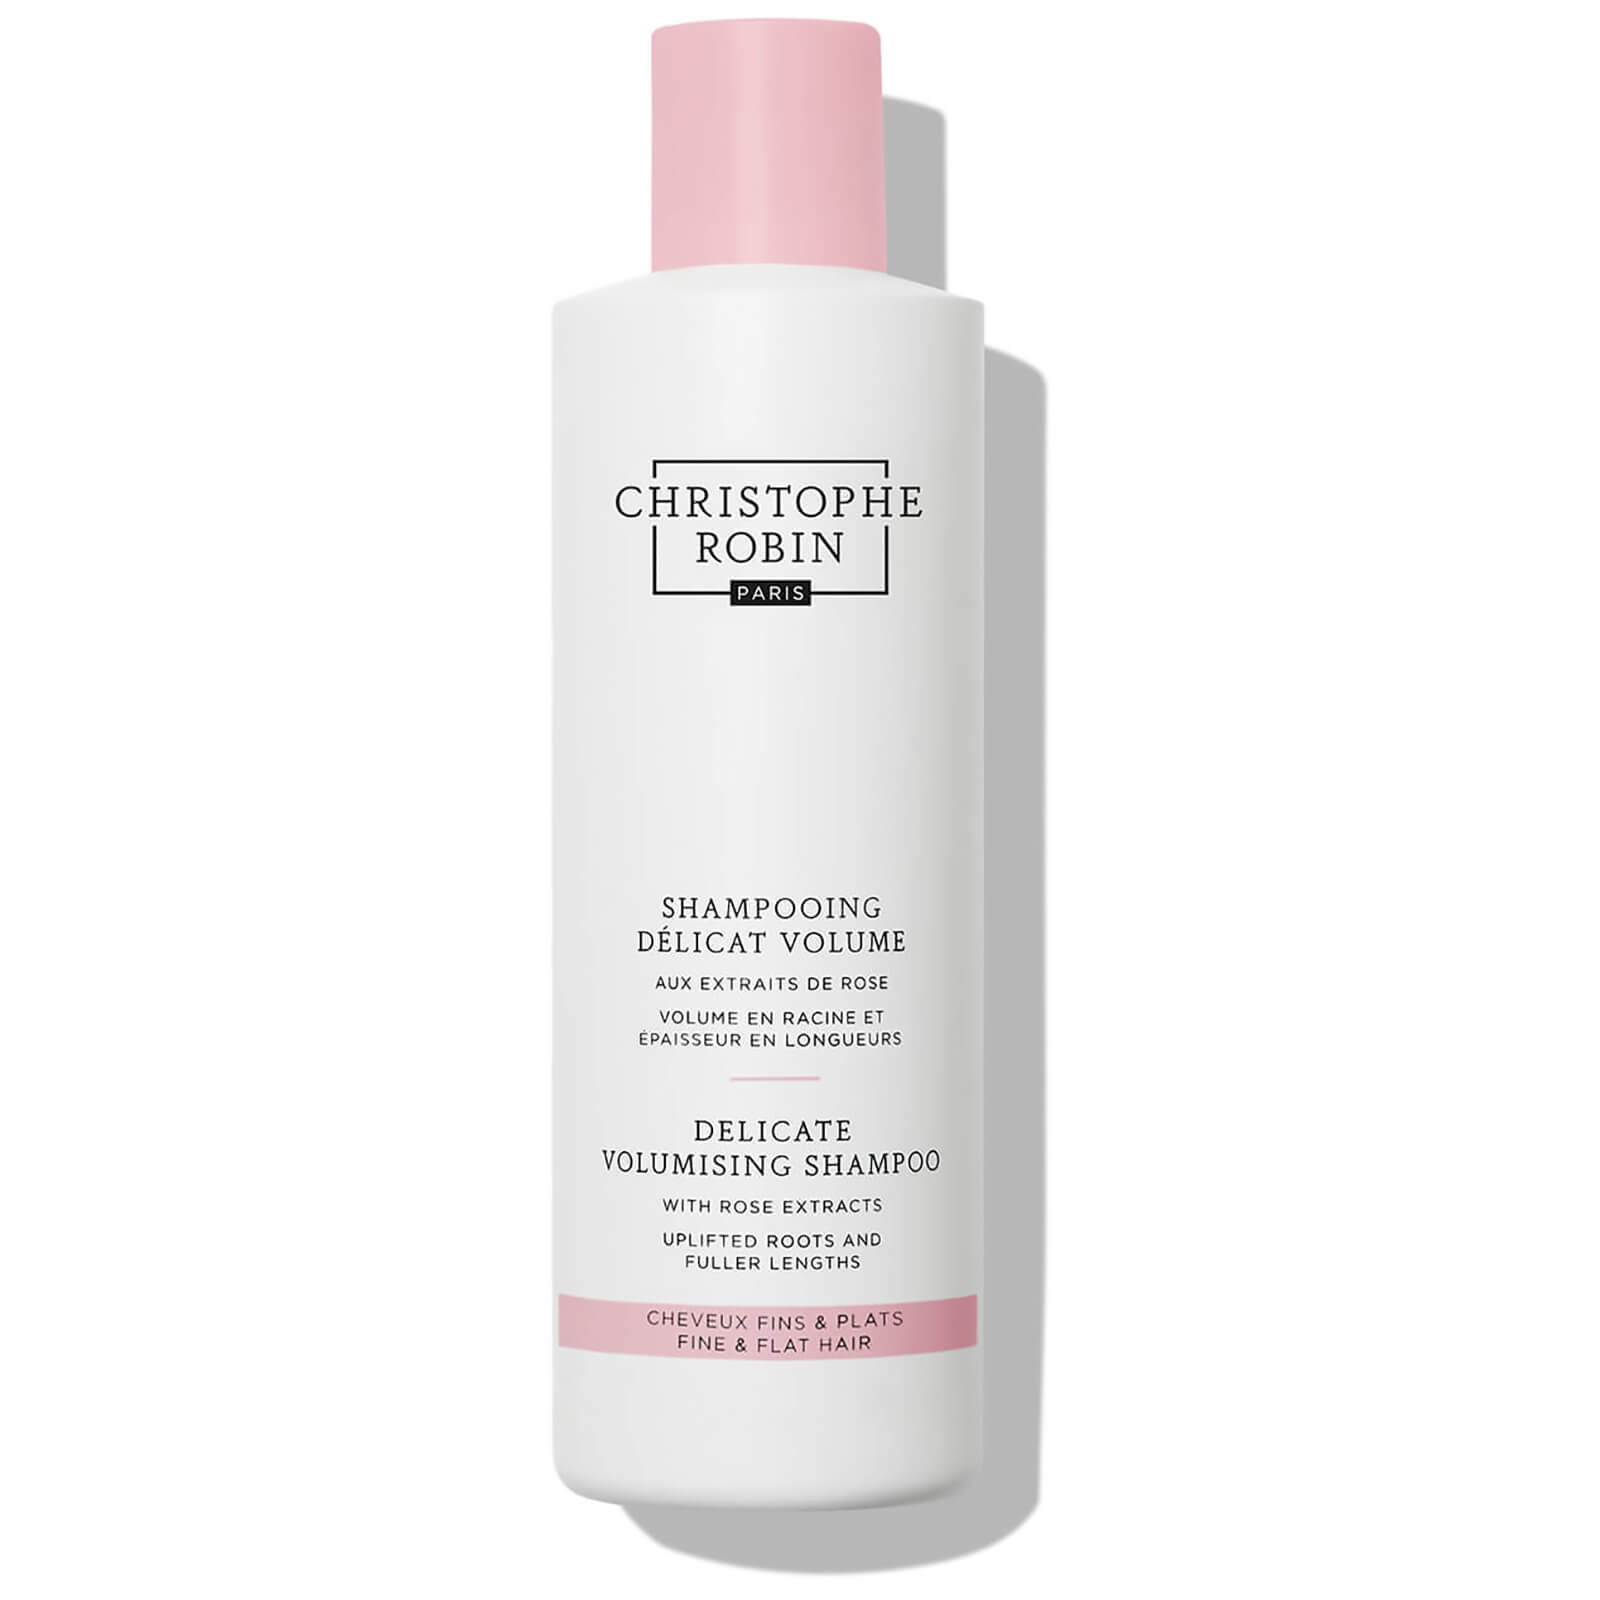 Christophe Robin Volumising Shampoo with Rose Extracts 250 ml von Christophe Robin